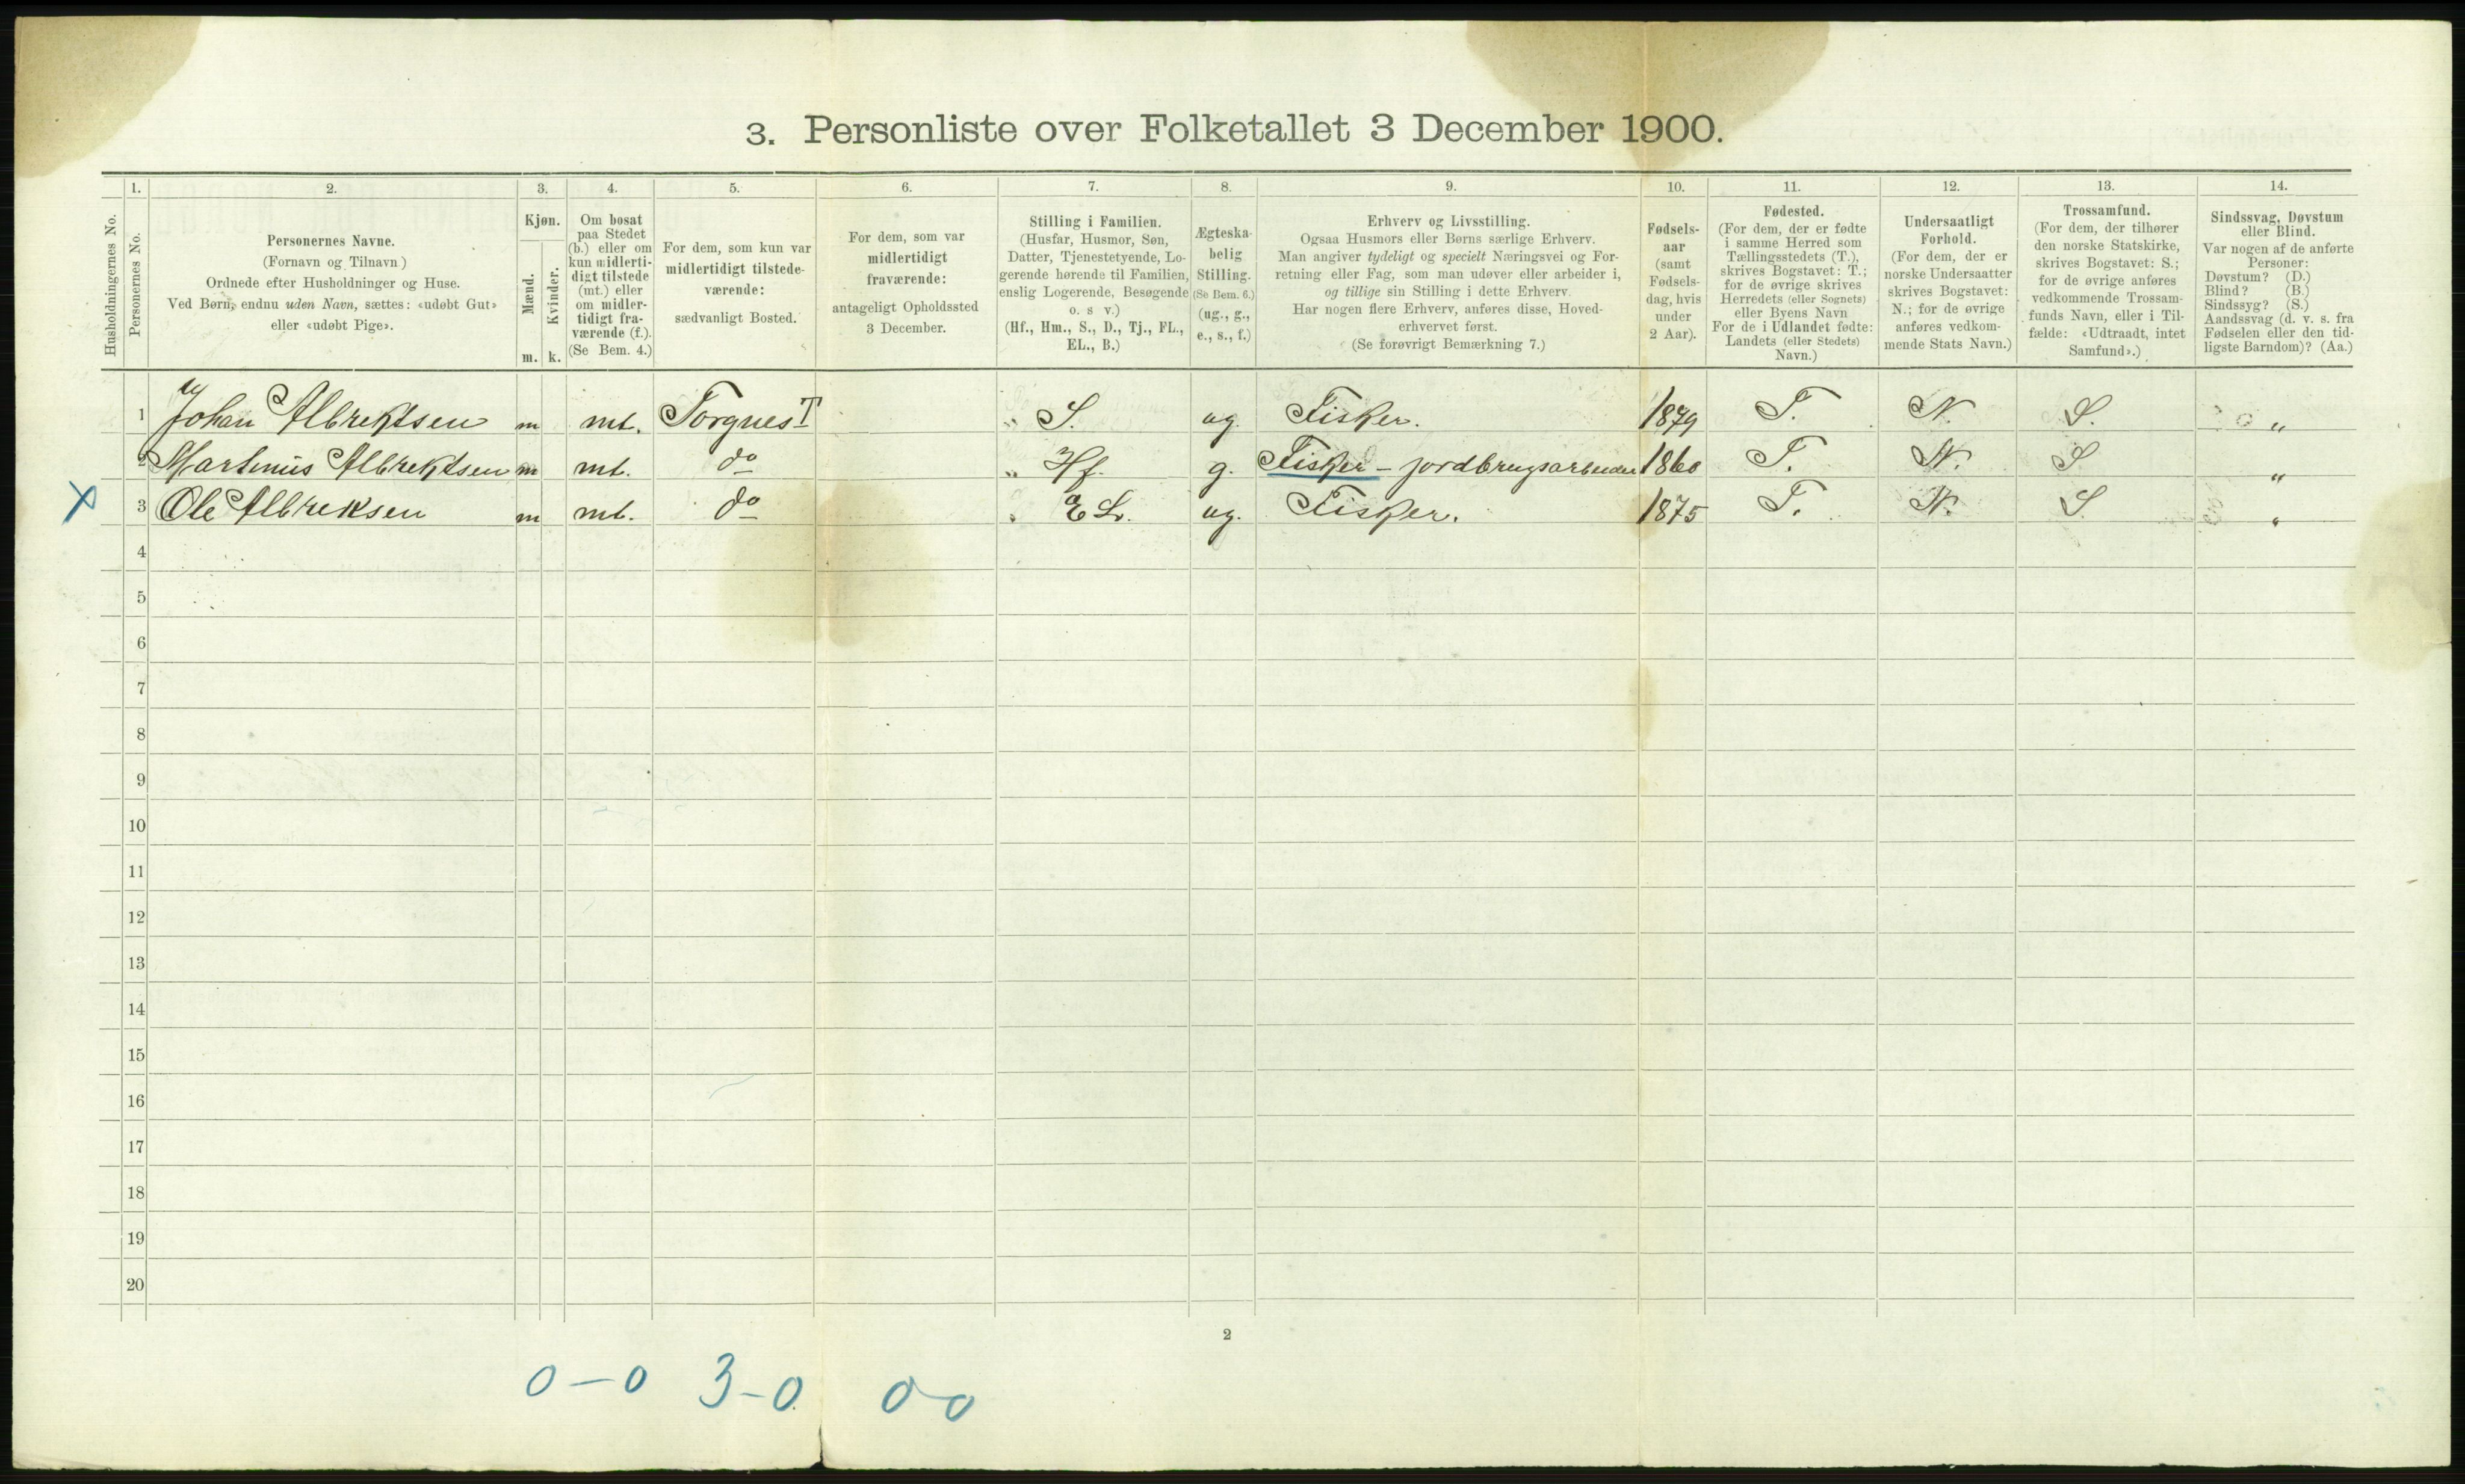 RA, 1900 Census - ship lists from ships in Norwegian harbours, harbours abroad and at sea, 1900, p. 2930